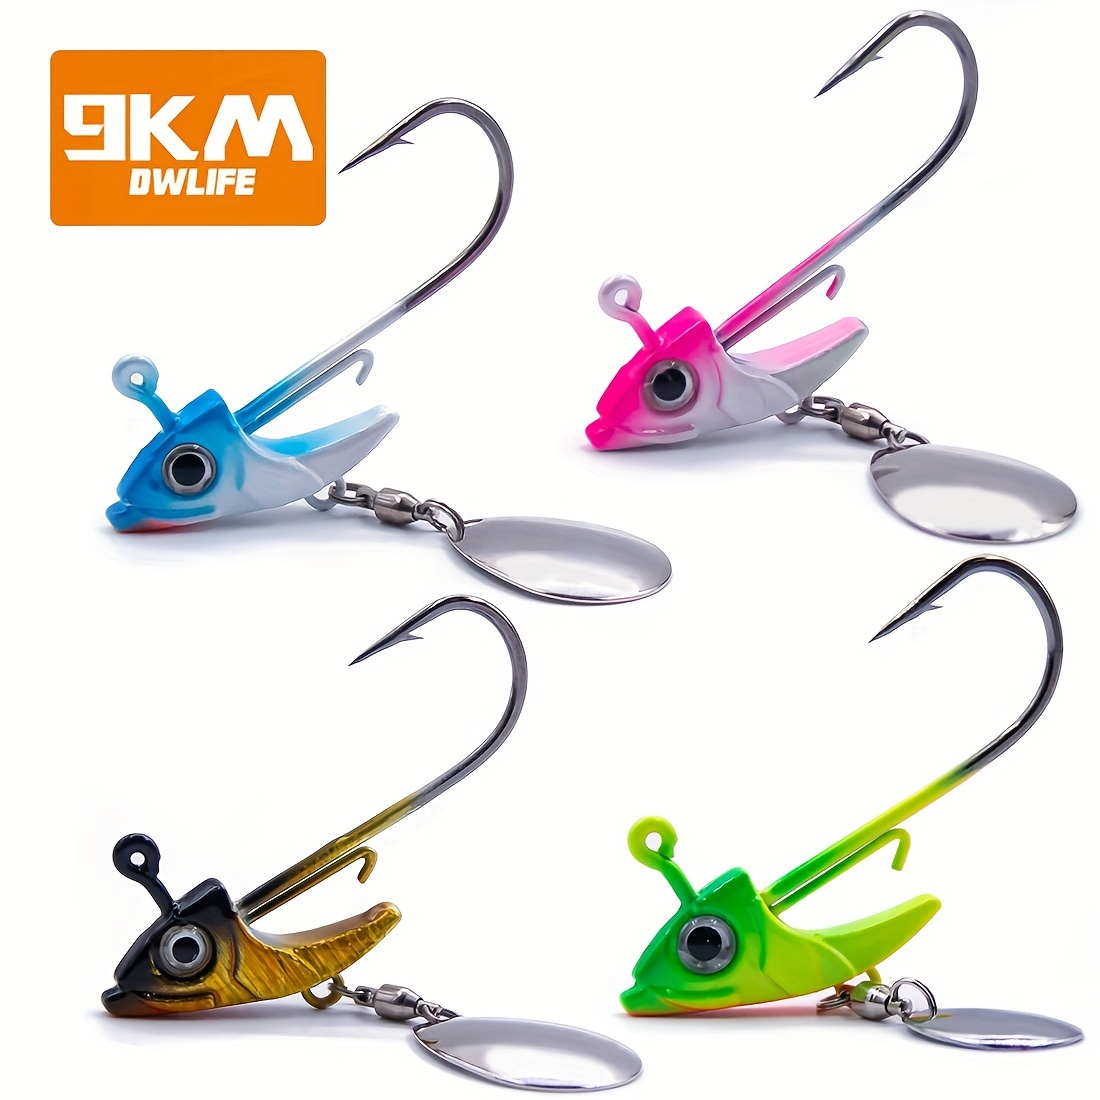 Pre rigged Jig Head Soft Fishing Lures Paddle Tail - Temu